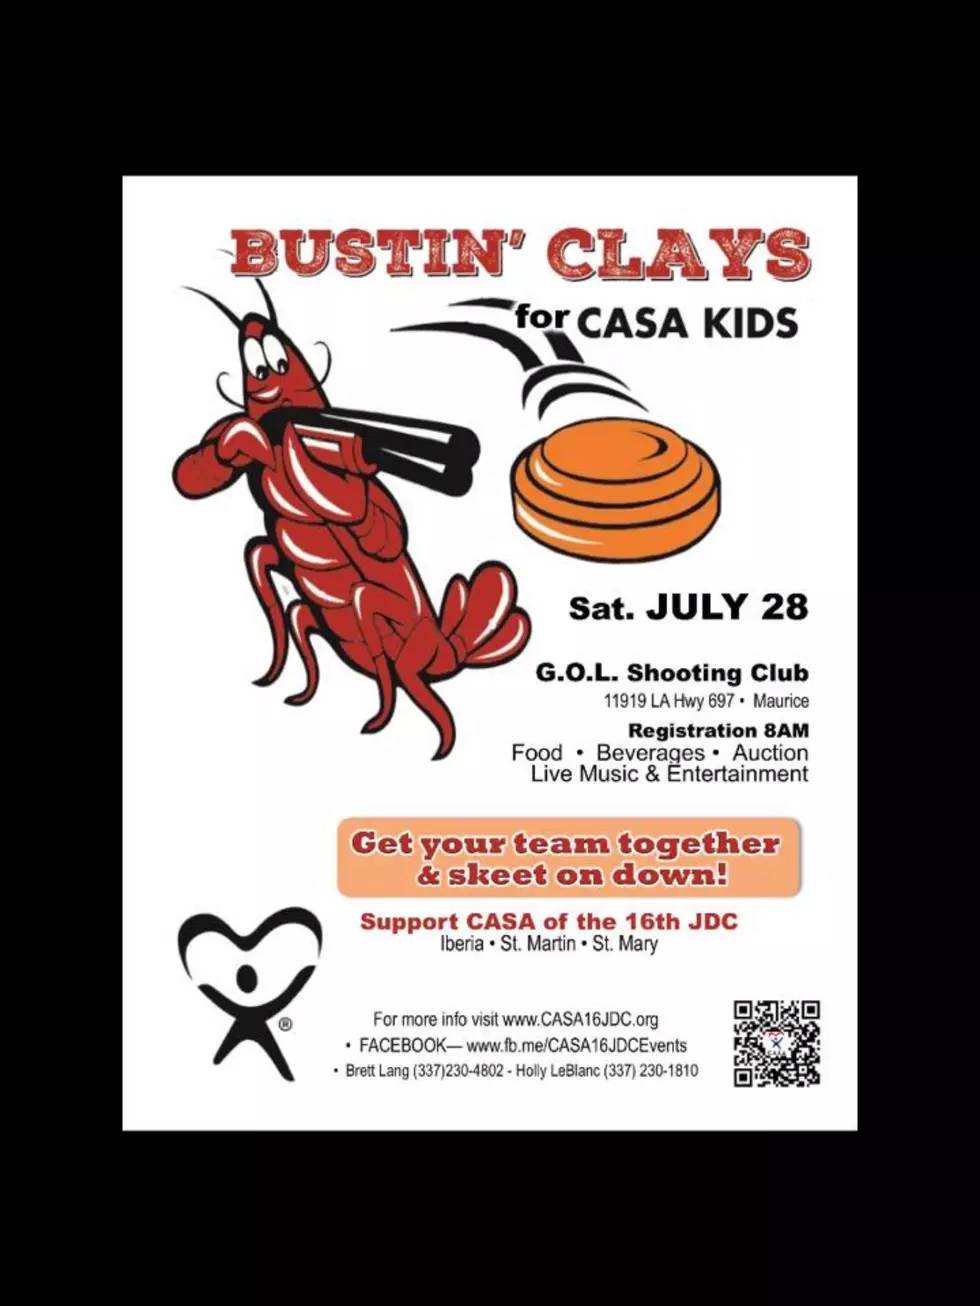 Bustin’ Clays for CASA KIDS